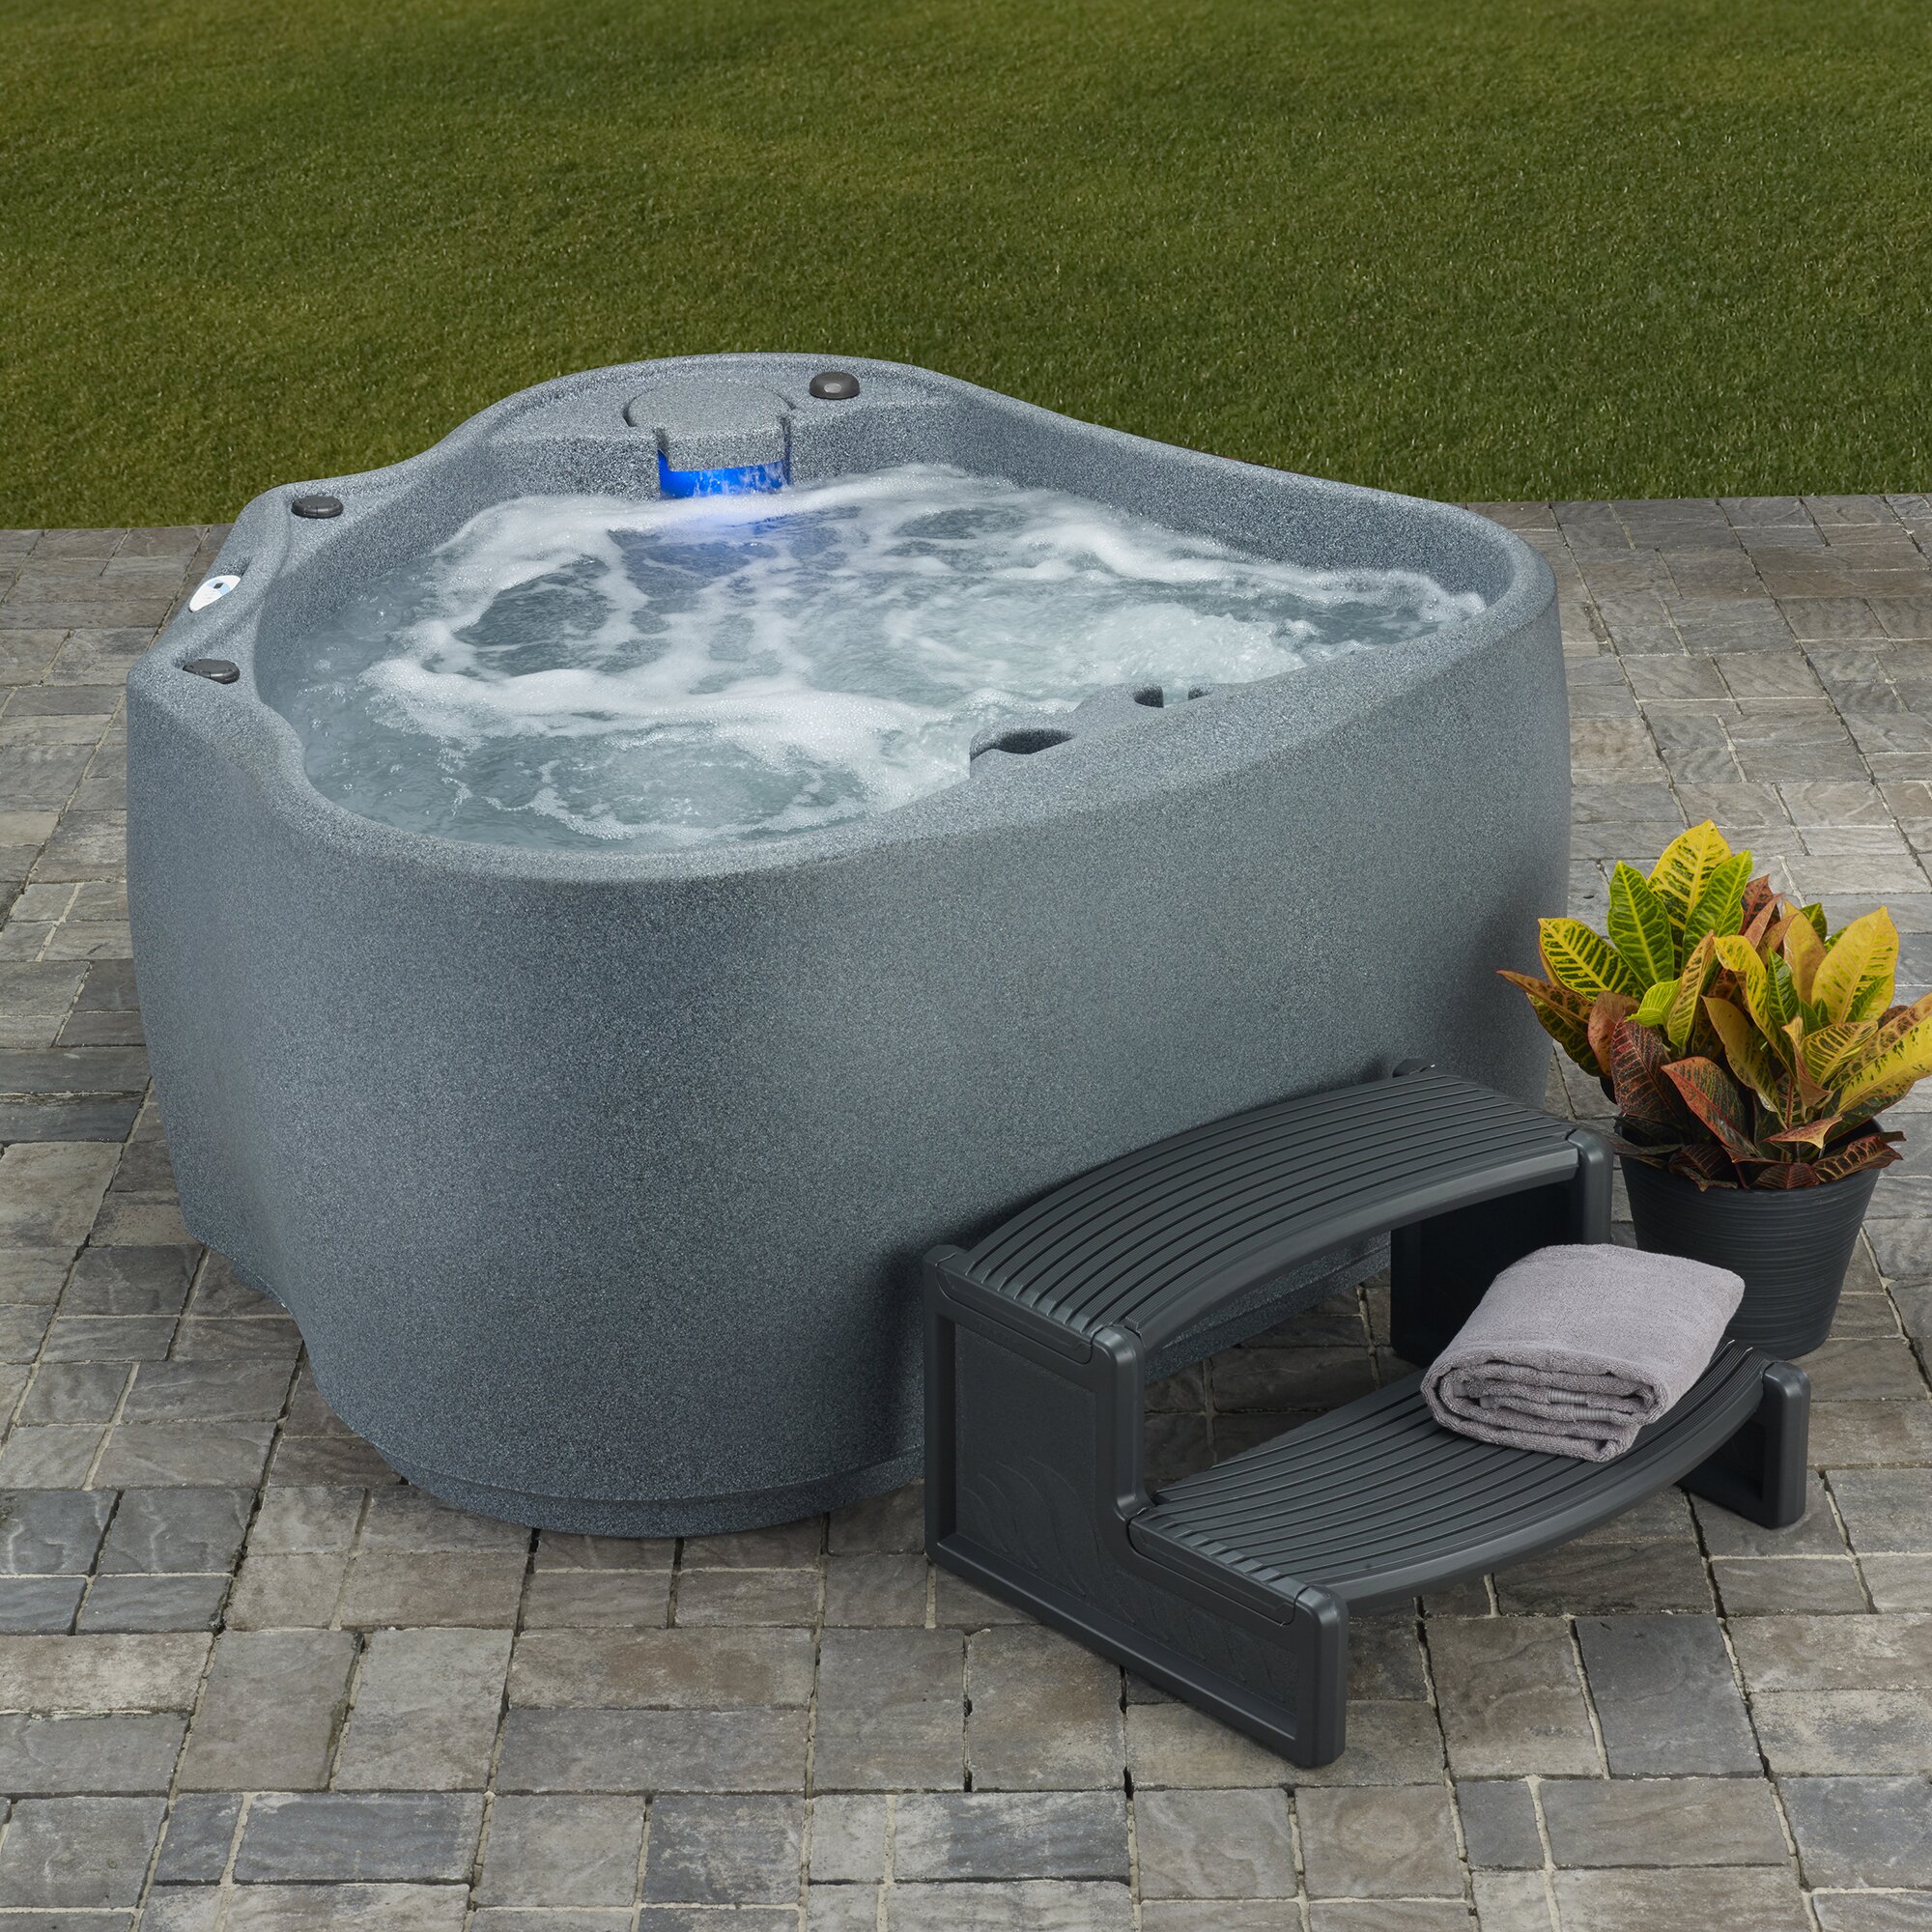 2 Person 14 Jet With Easy Plug N Play Spa And LED Waterfall AR 300 